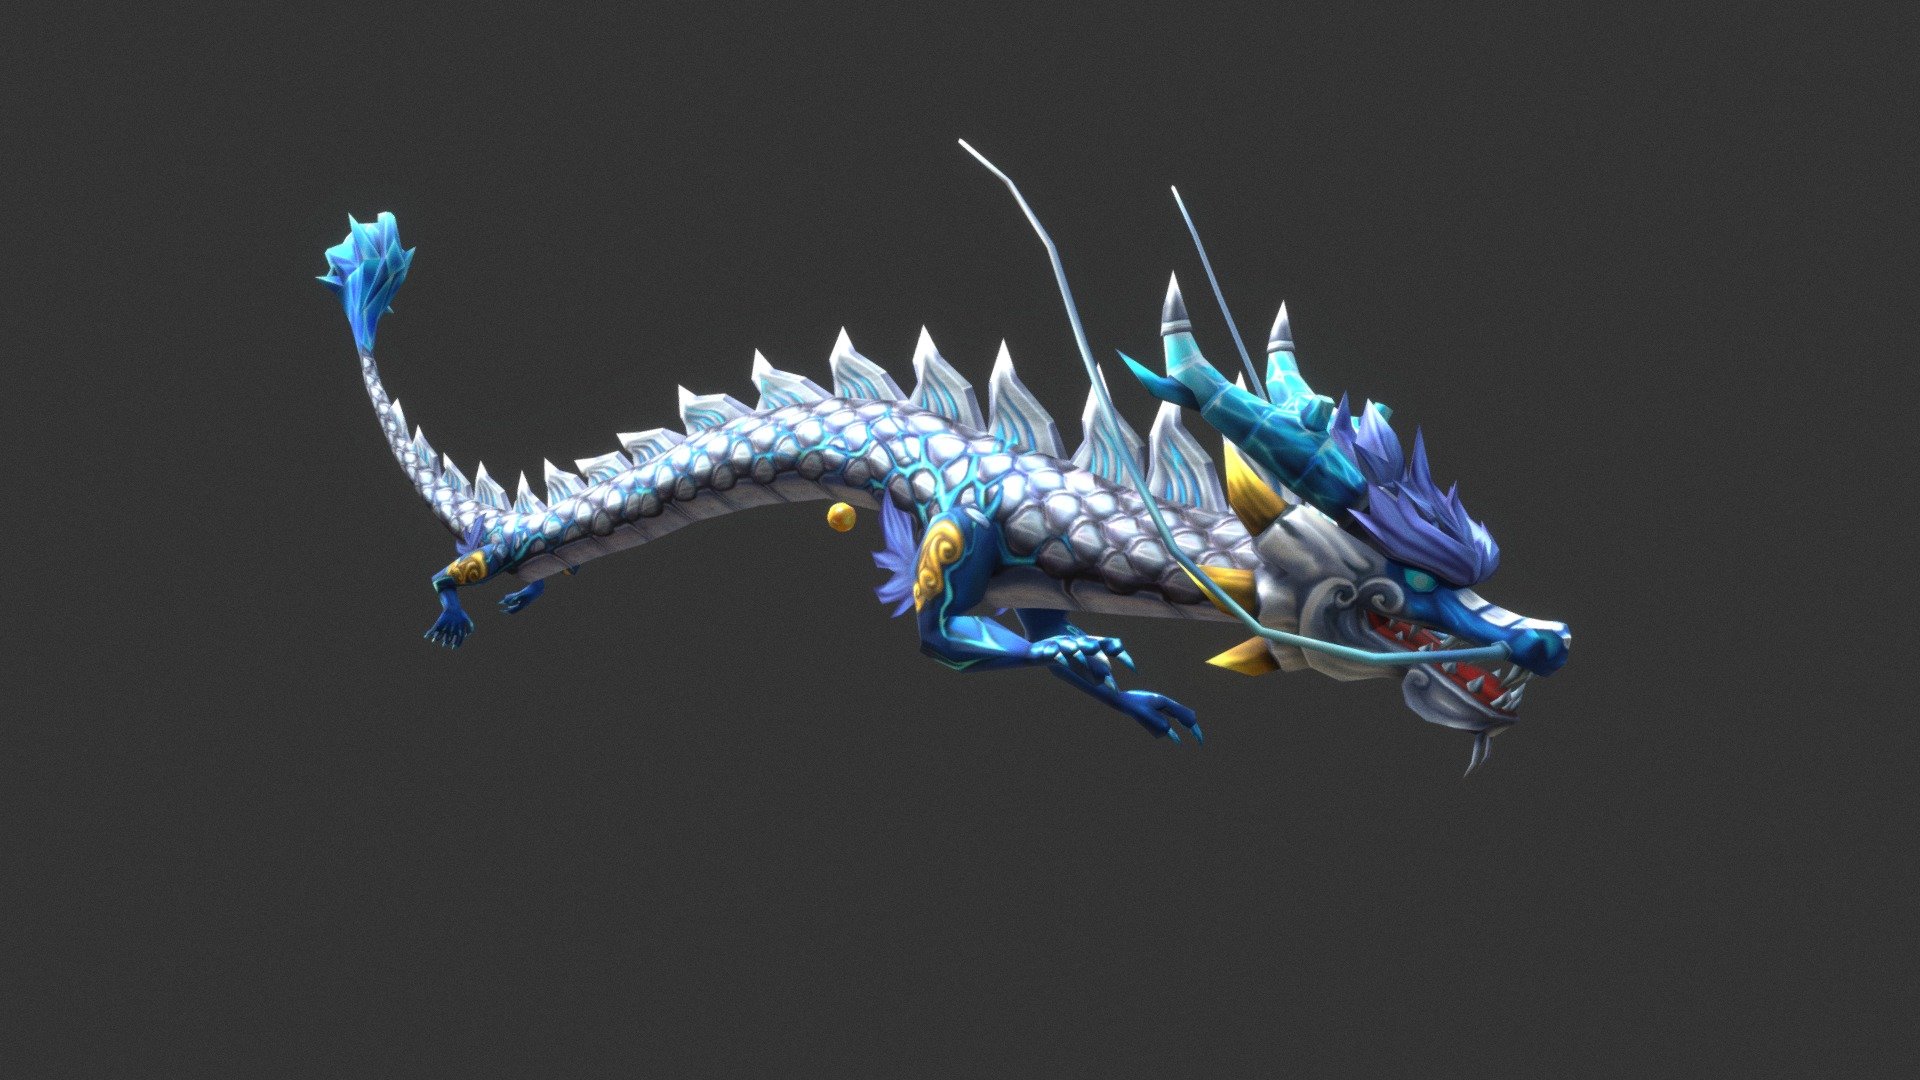 Chinese Silver Dragon lowpoly model for mobilegames , texture handpainting - Chinese Silver Dragon - 3D model by KickAss 3d model